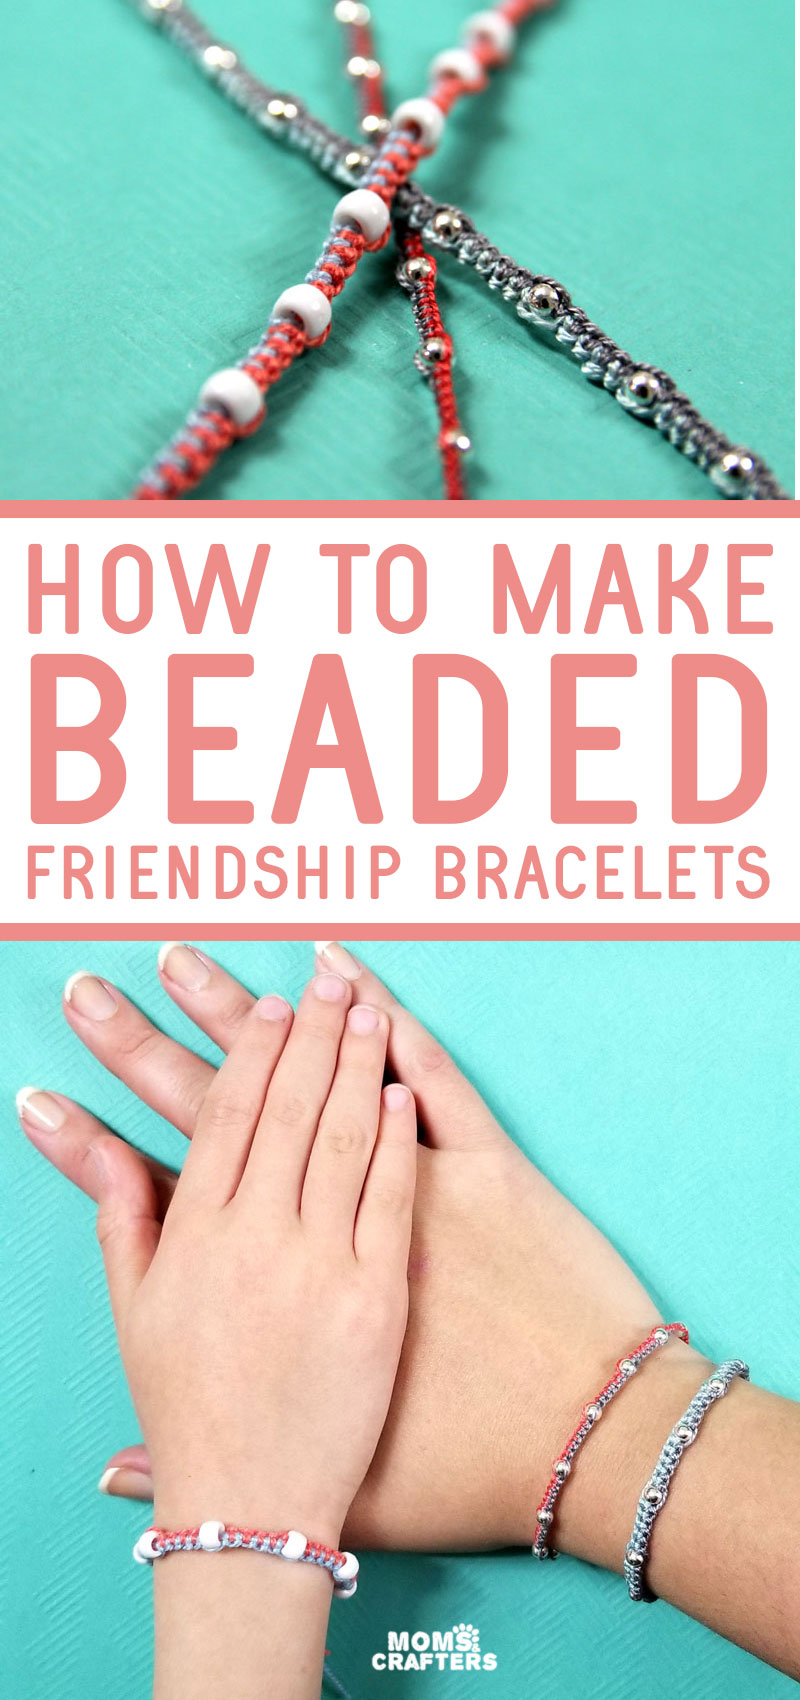 Easy Tutorial on Making a Multi-strand String and Bead Bracelet